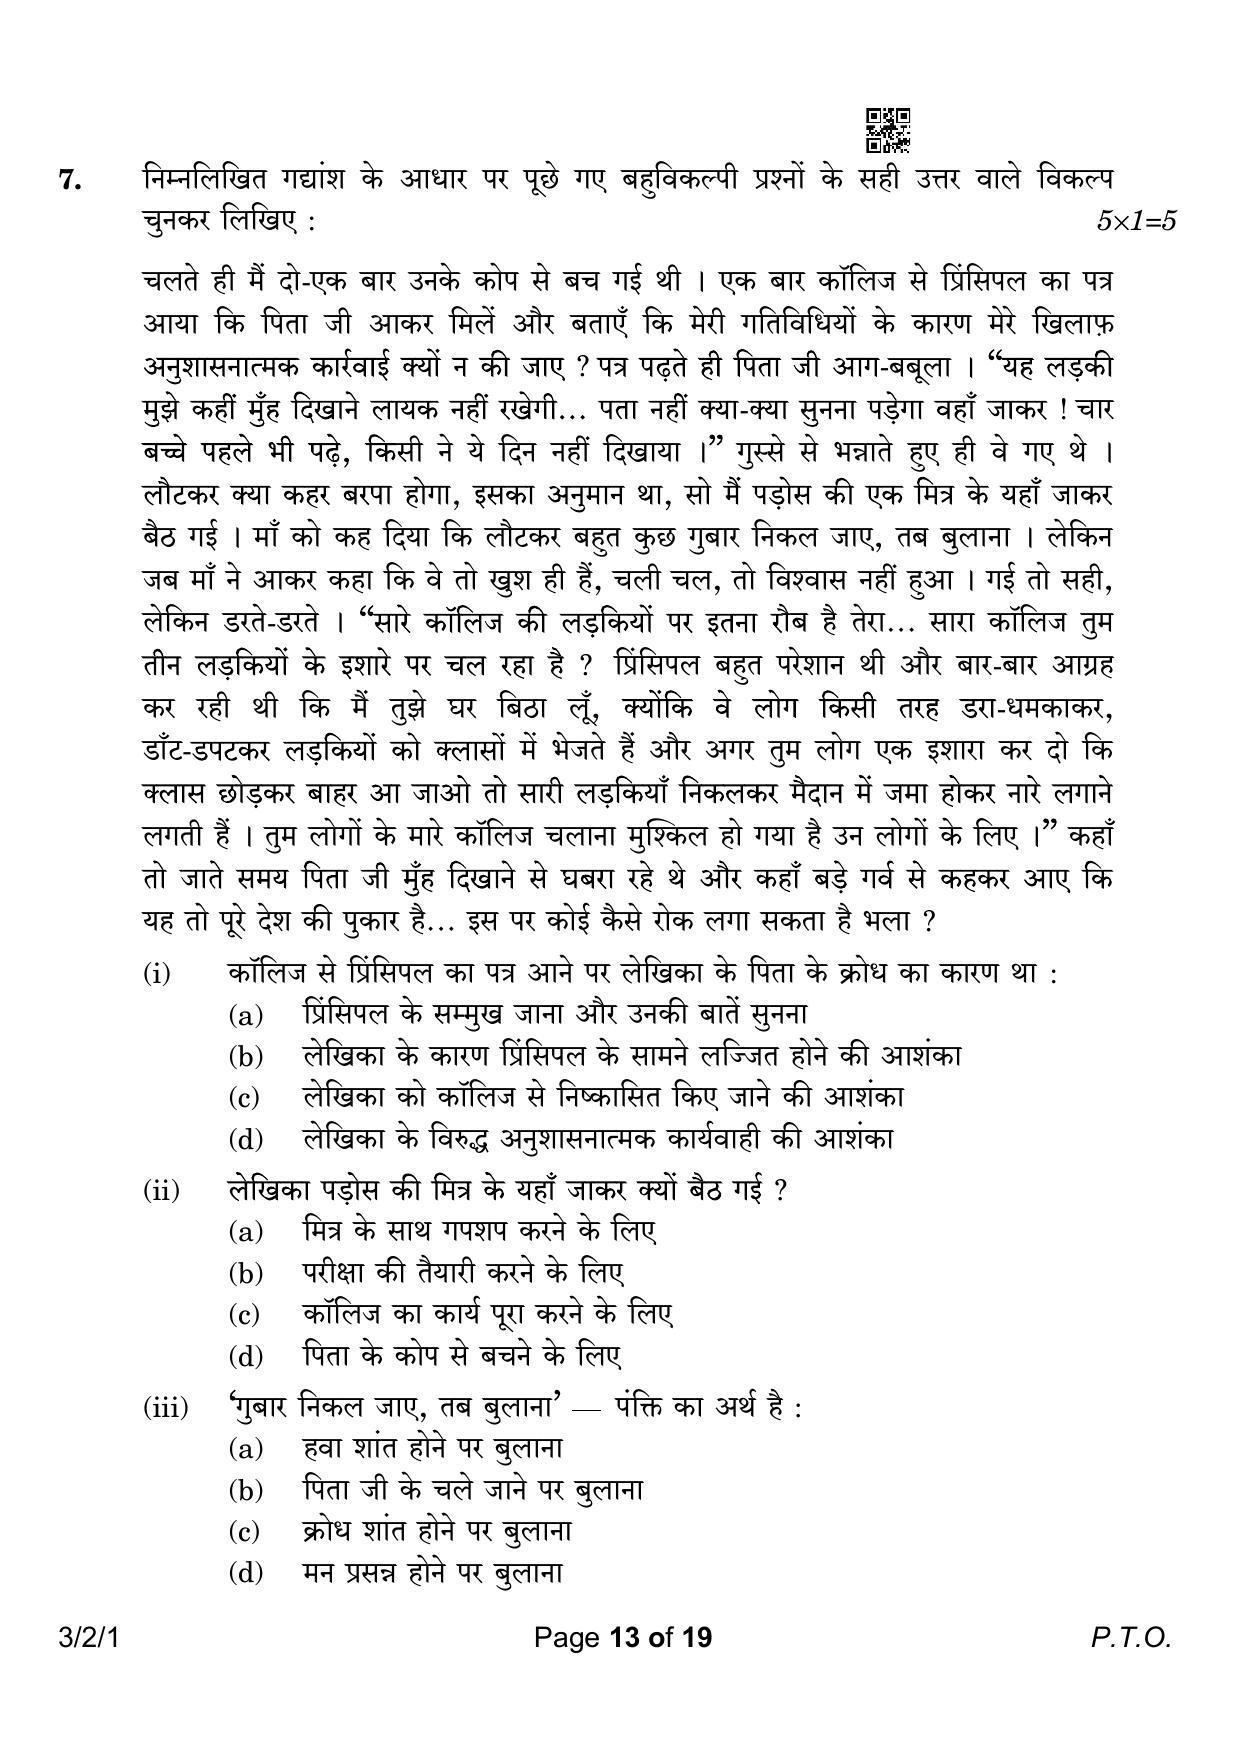 CBSE Class 10 3-2-1 Hindi A 2023 Question Paper - Page 13